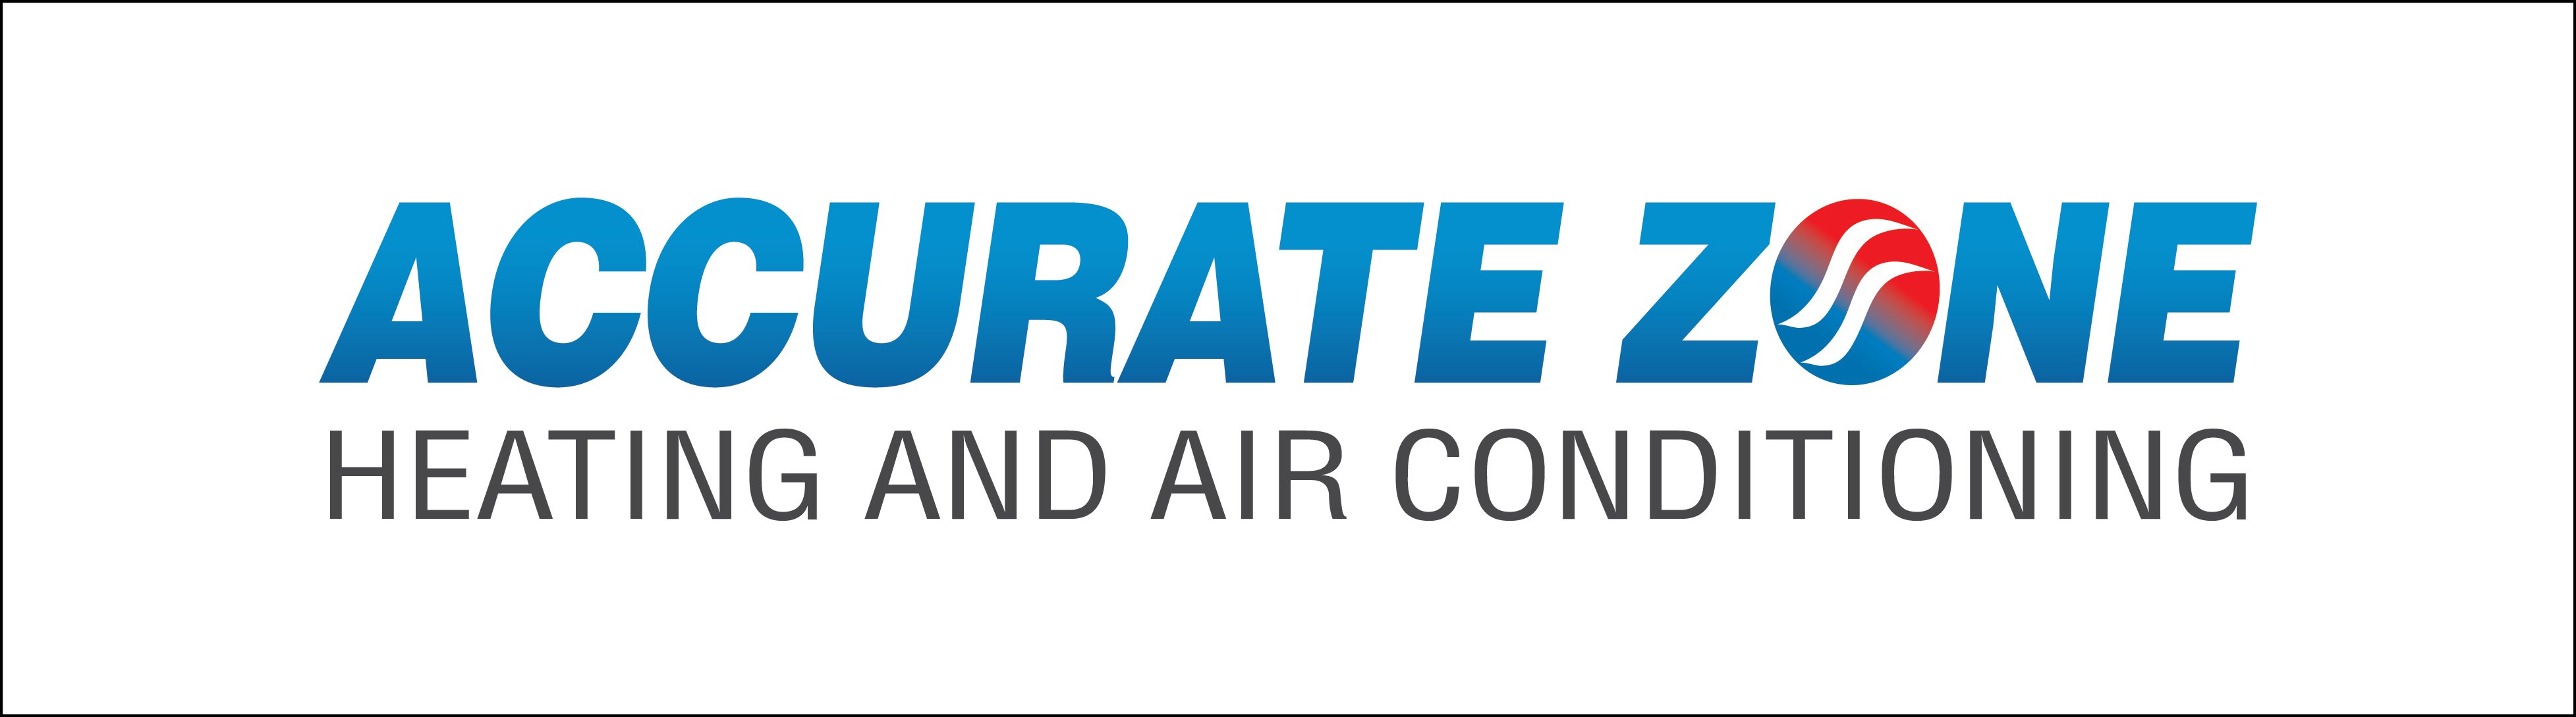 Accurate Zone Heating and Air Conditioning Logo